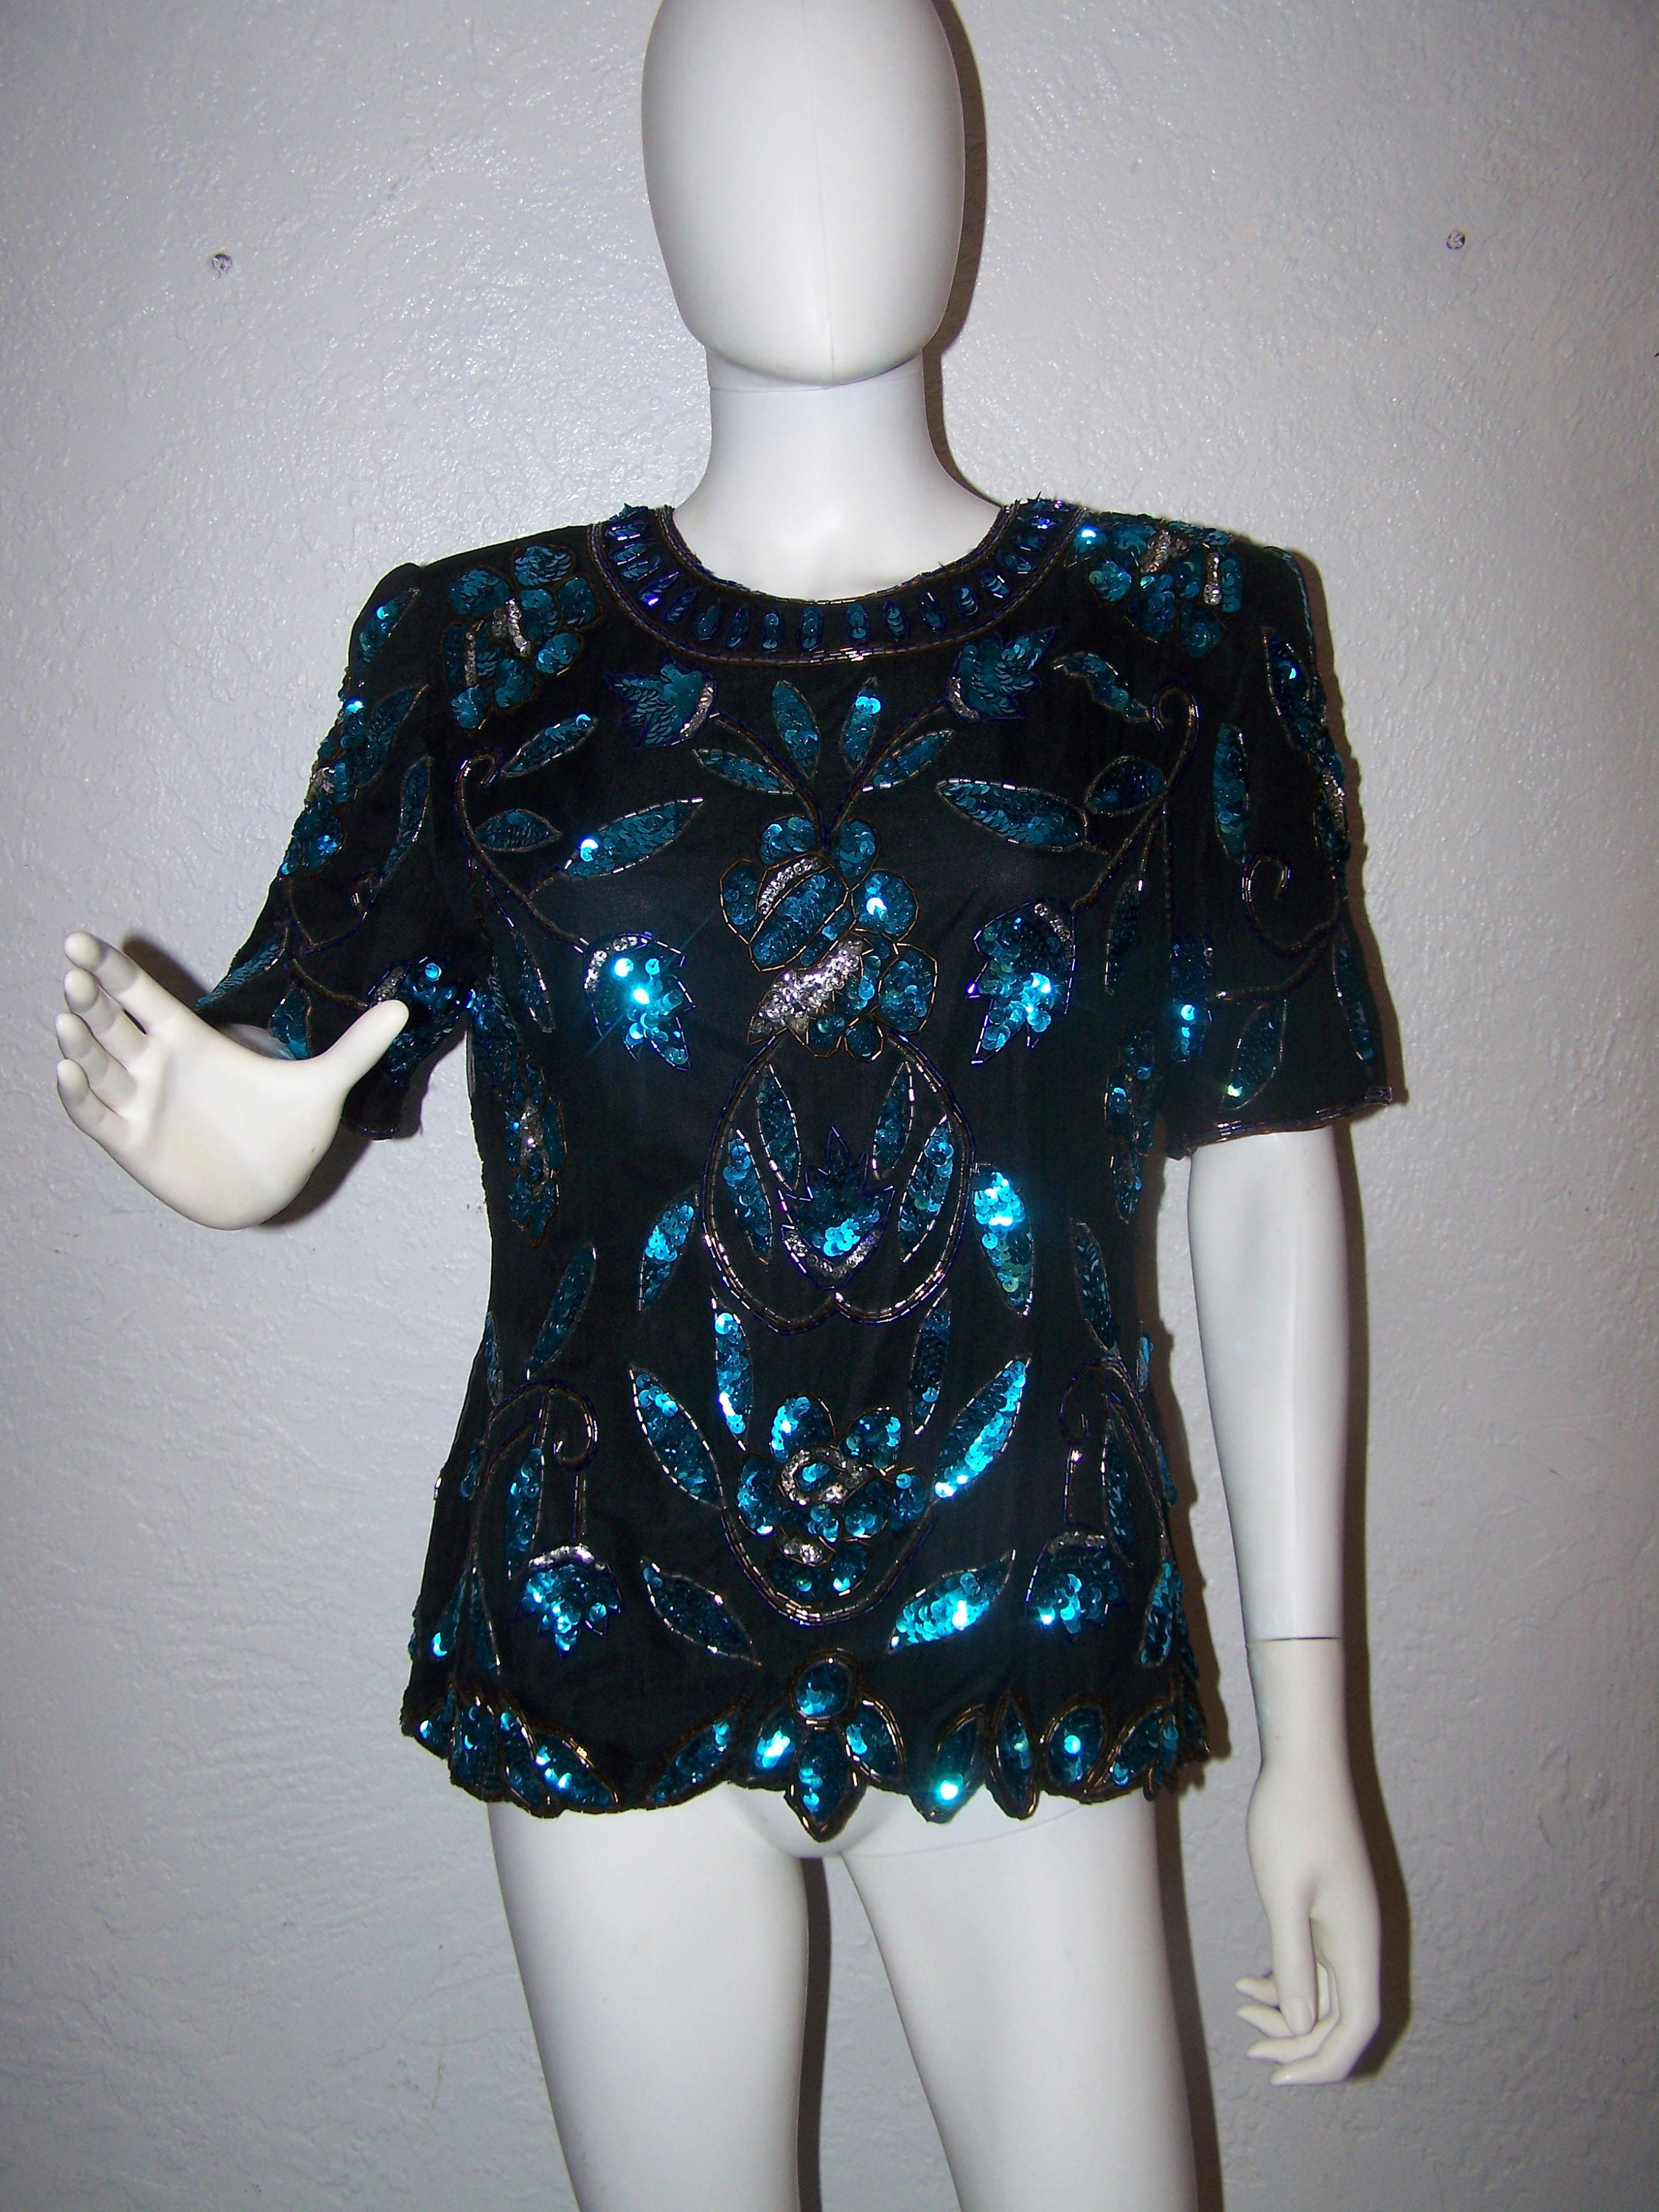 Stenay Sequin and Bead Floral Top Size ...